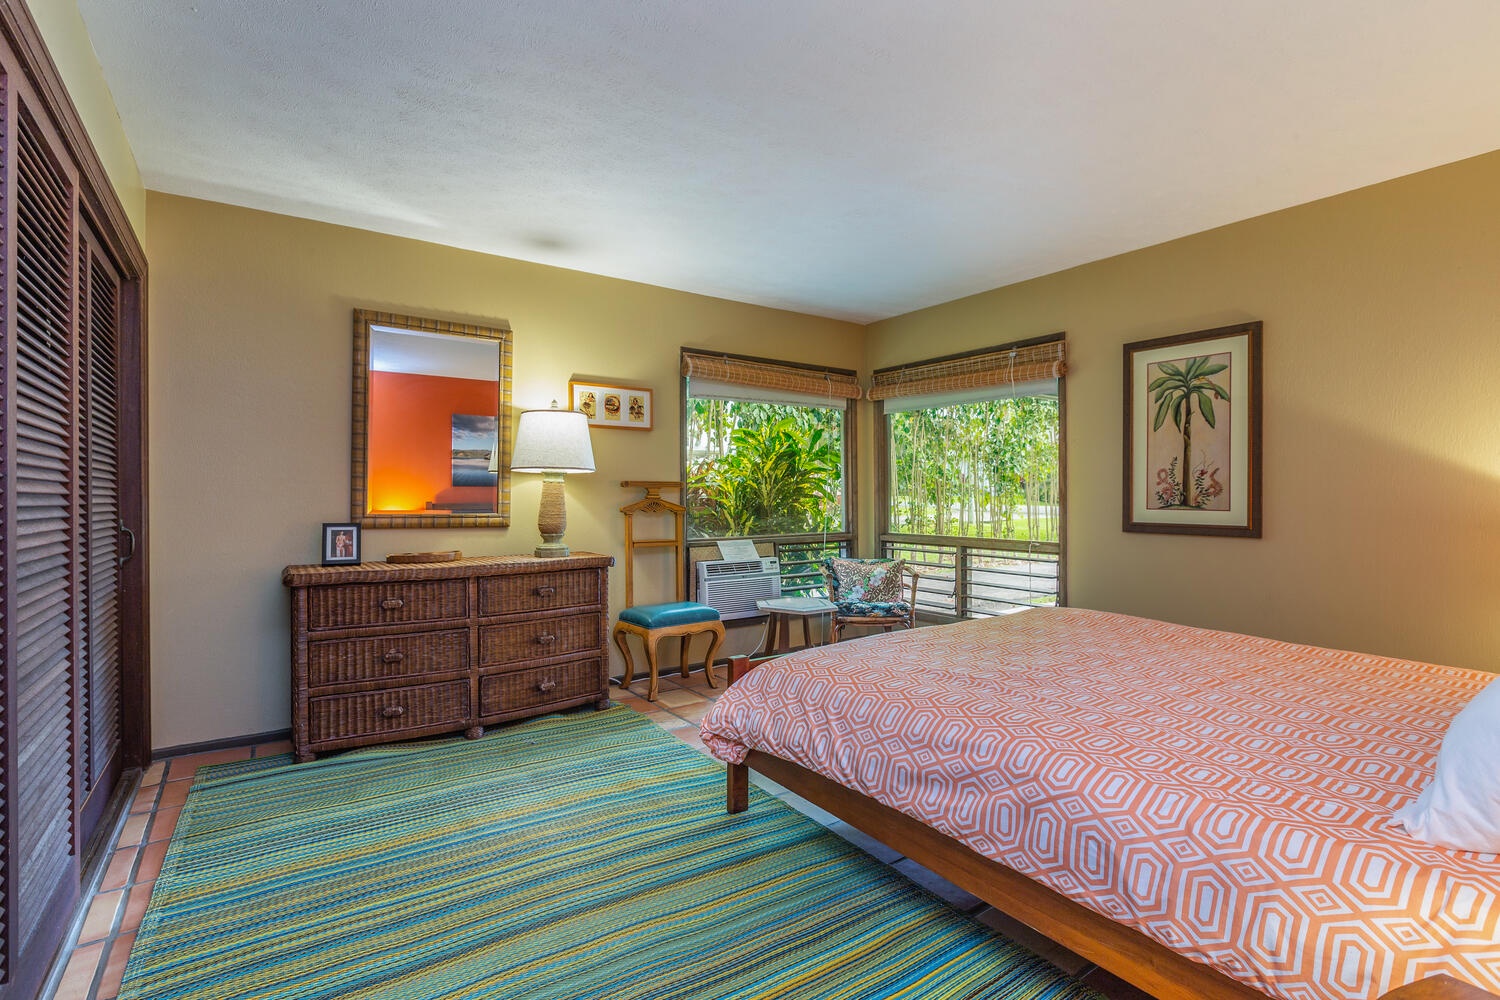 Princeville Vacation Rentals, Ailana Hale - Guest Bedroom with king bed